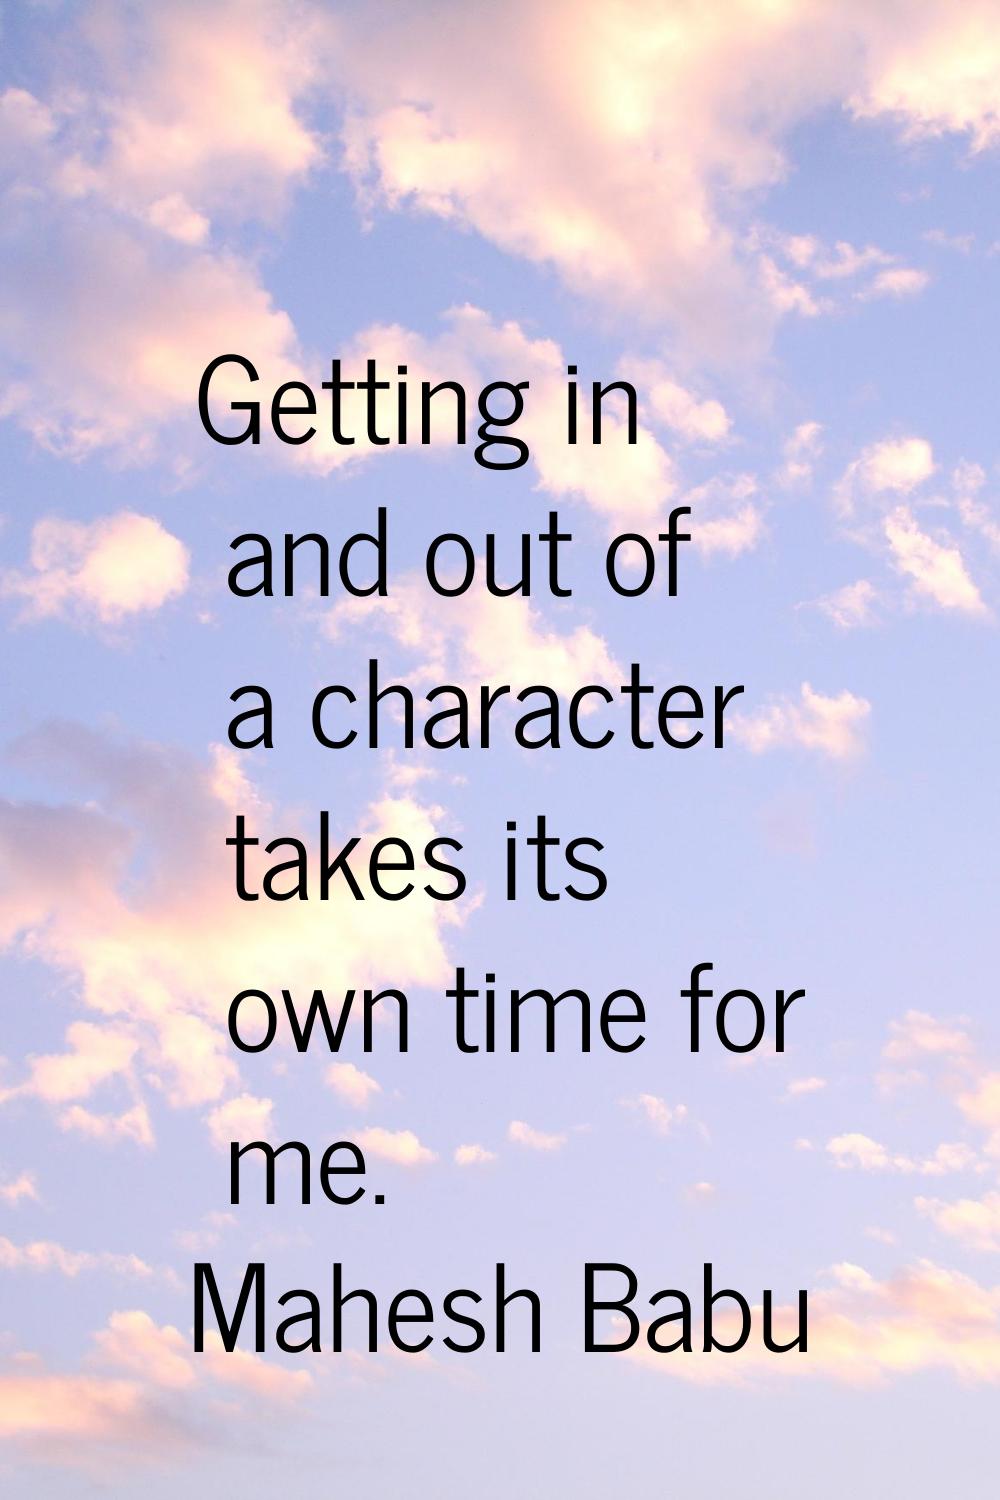 Getting in and out of a character takes its own time for me.